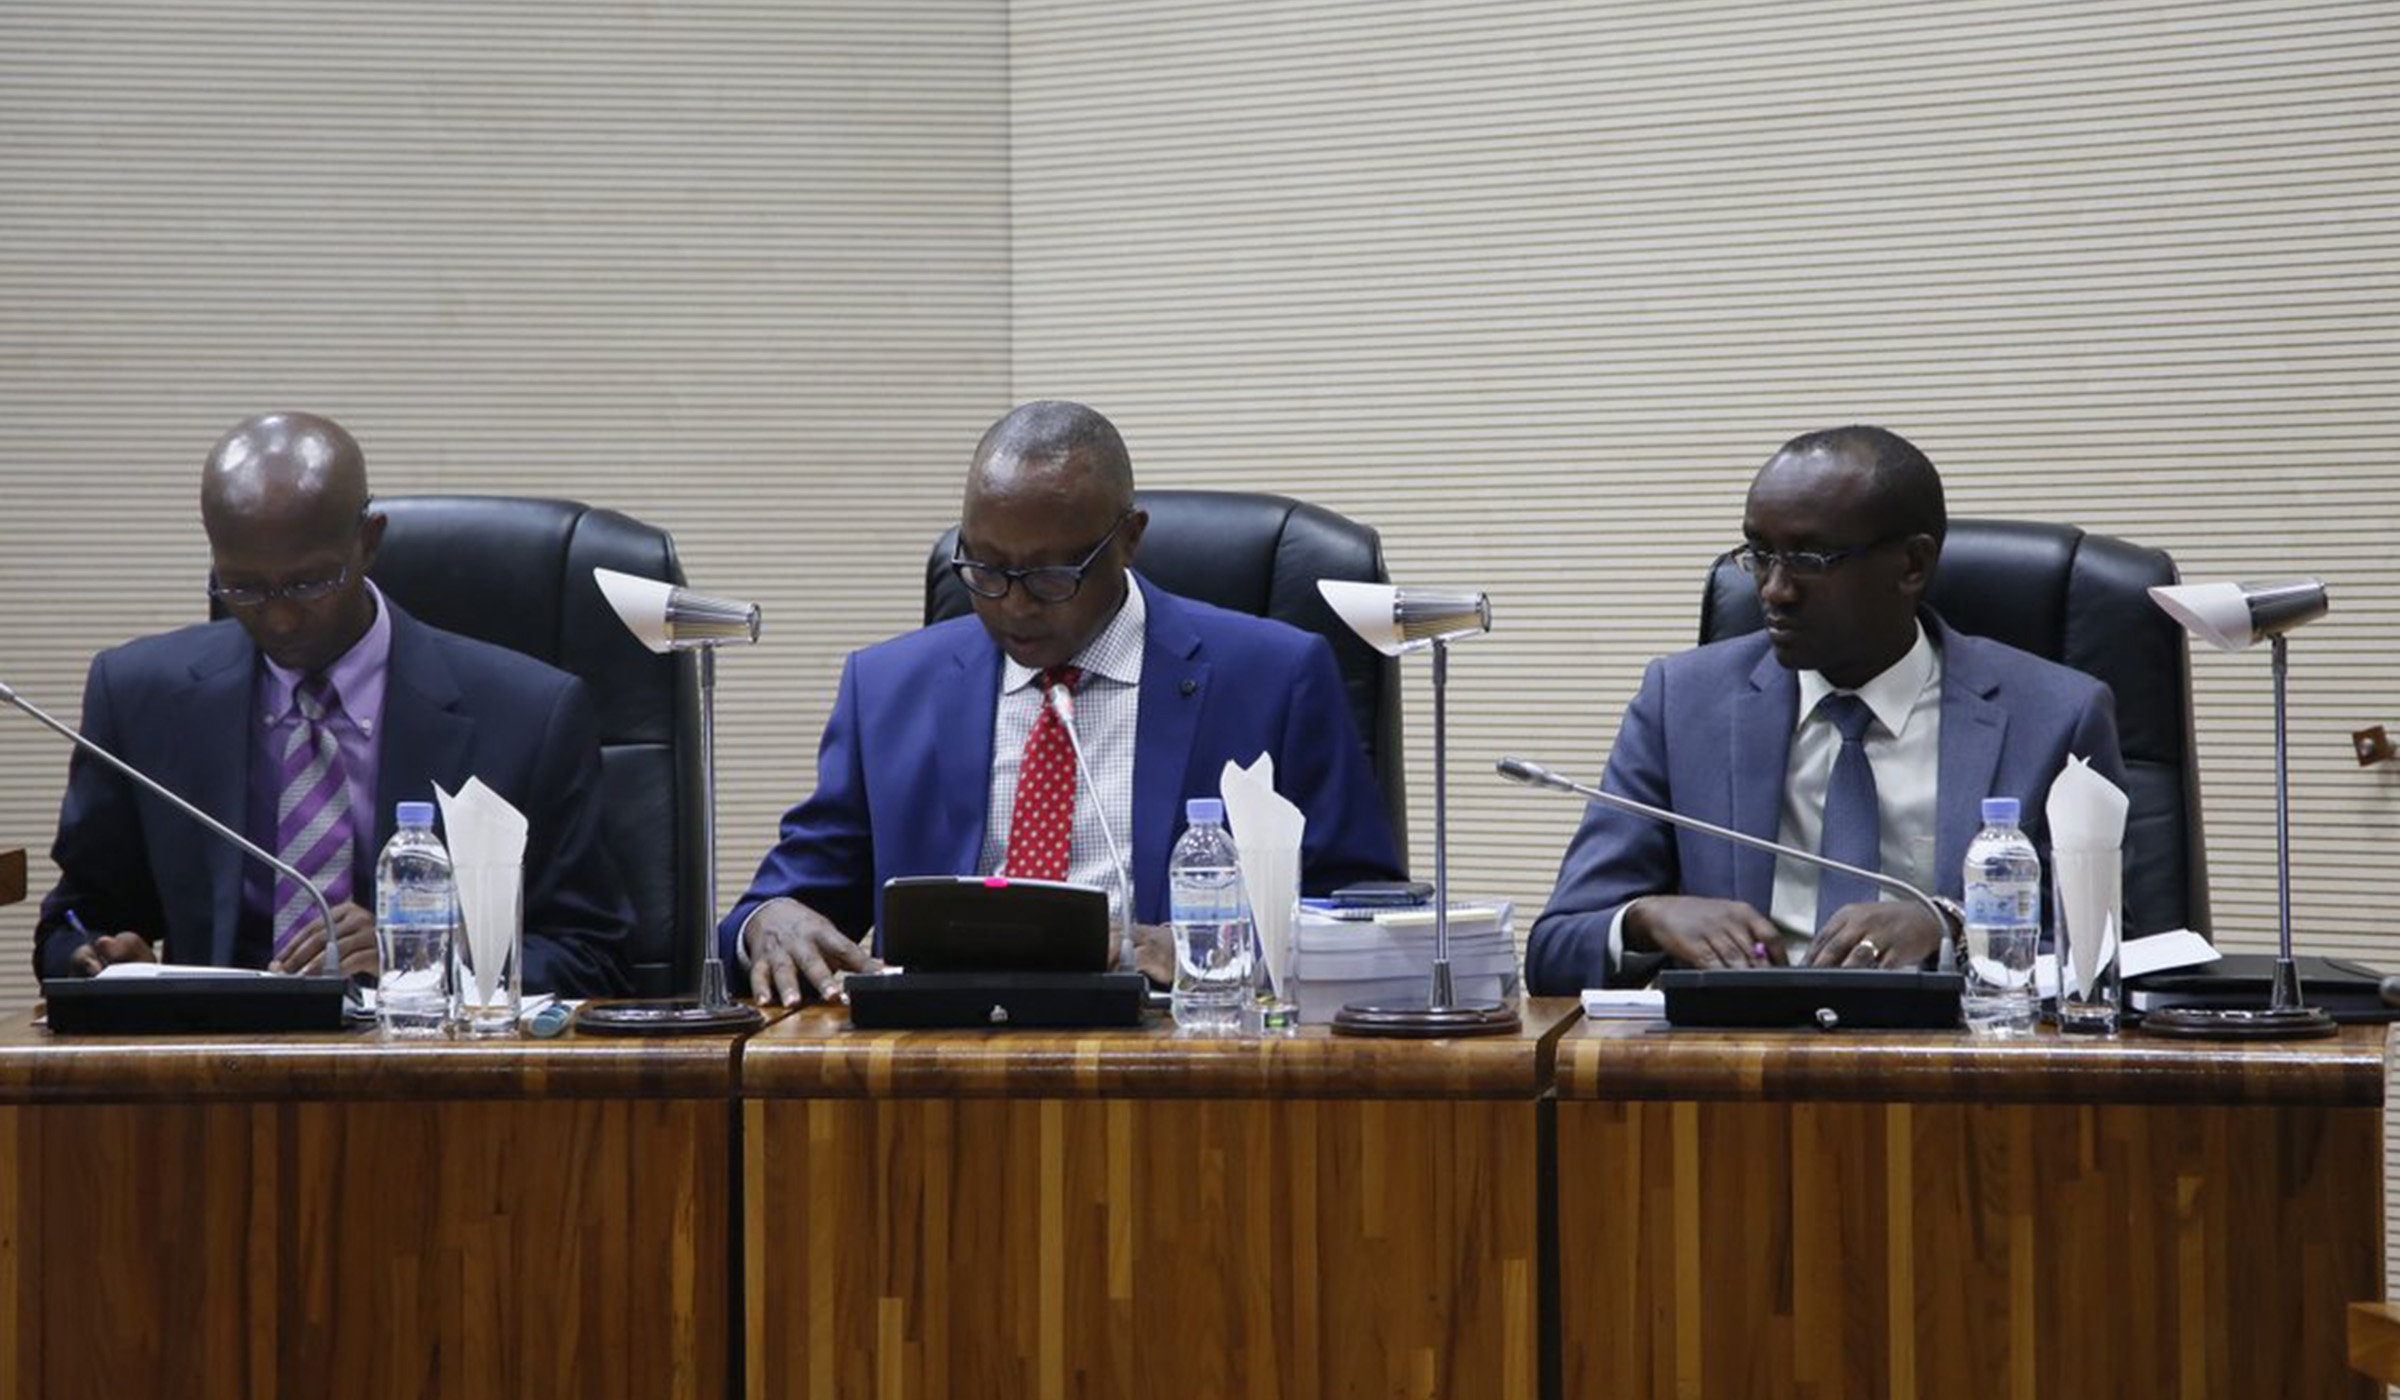 Auditor-General Obadiah Biraro, flanked by his deputy Patrick Habimana (right), presents the 2017/18 annual report to a joint session of the Lower House and Senate at the Parliamentary Buildings in Kimihurura on April 29. Left is Deputy Speaker in charge of Finance and Administration Sheikh Musa Fazil Harelimana. Biraro said there were fears that public funds amounting to over Rwf5.6 billion were either wasted or swindled in the 2017/18 fiscal year. Courtesy.